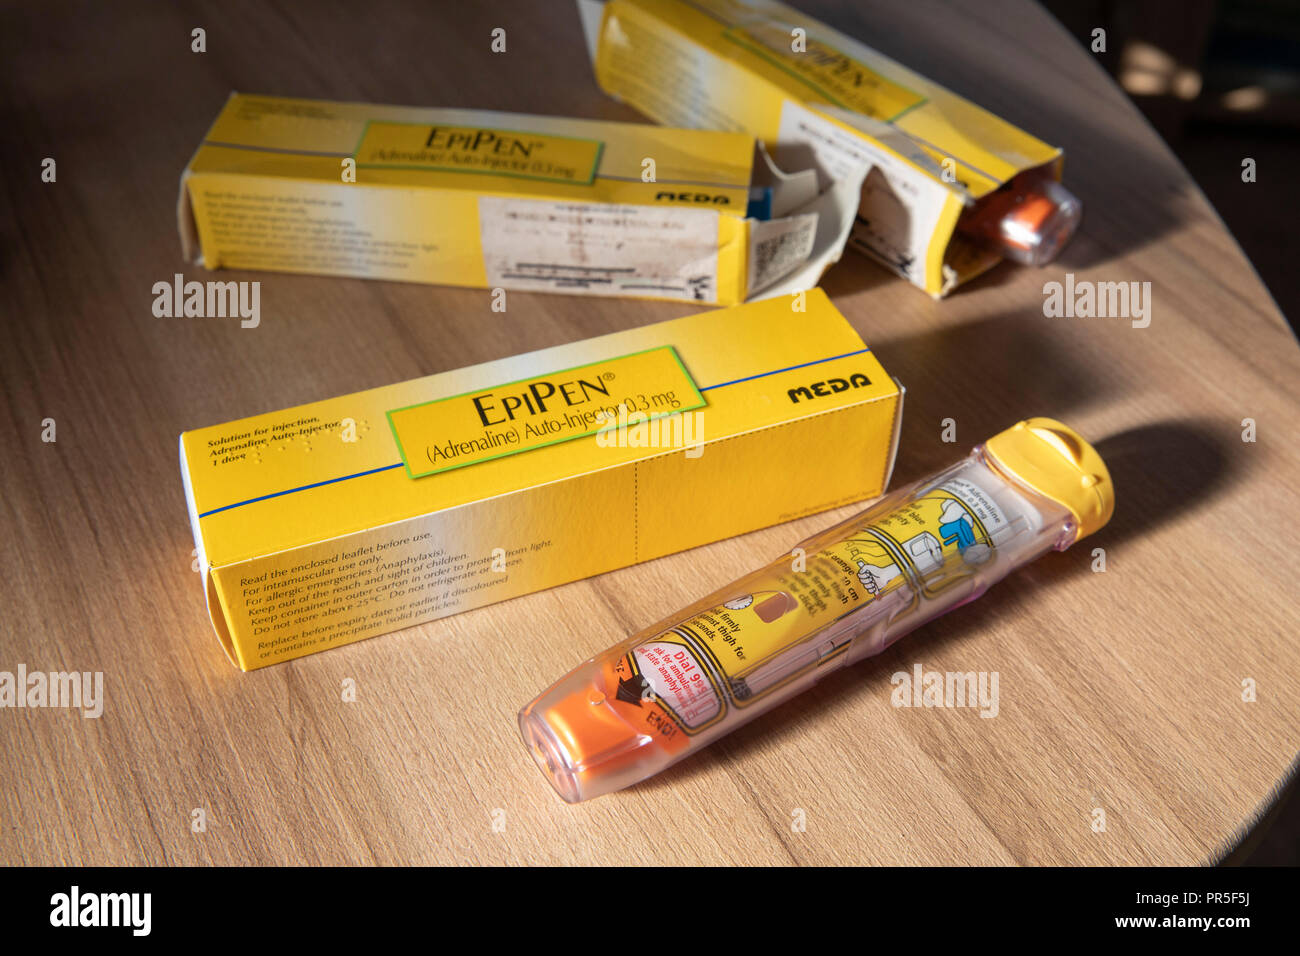 EpiPen autoejectors used to inject adrenaline into a victim of anaphalaxis.   Credit: Gareth Llewelyn/Alamy Stock Photo